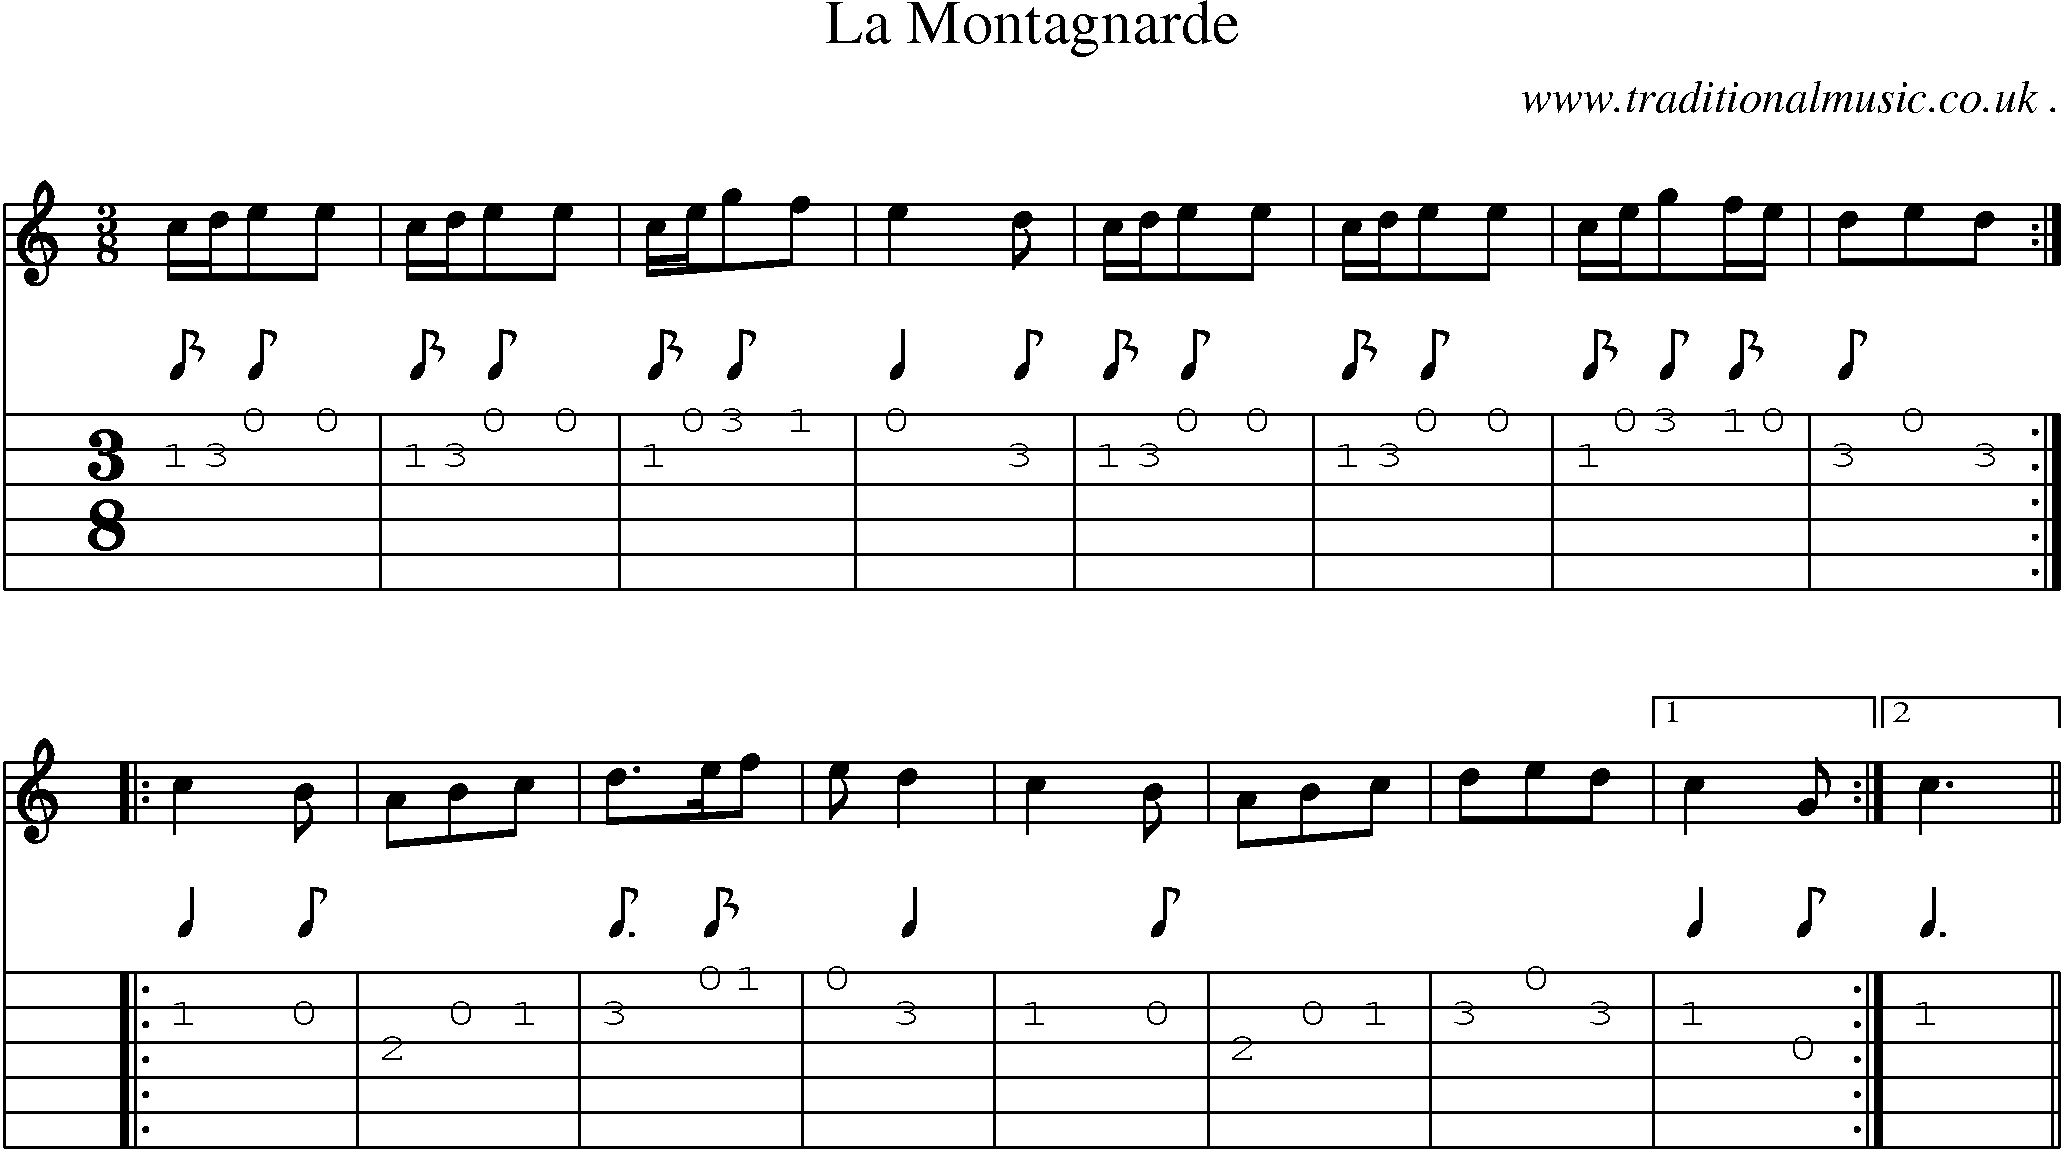 Sheet-Music and Guitar Tabs for La Montagnarde